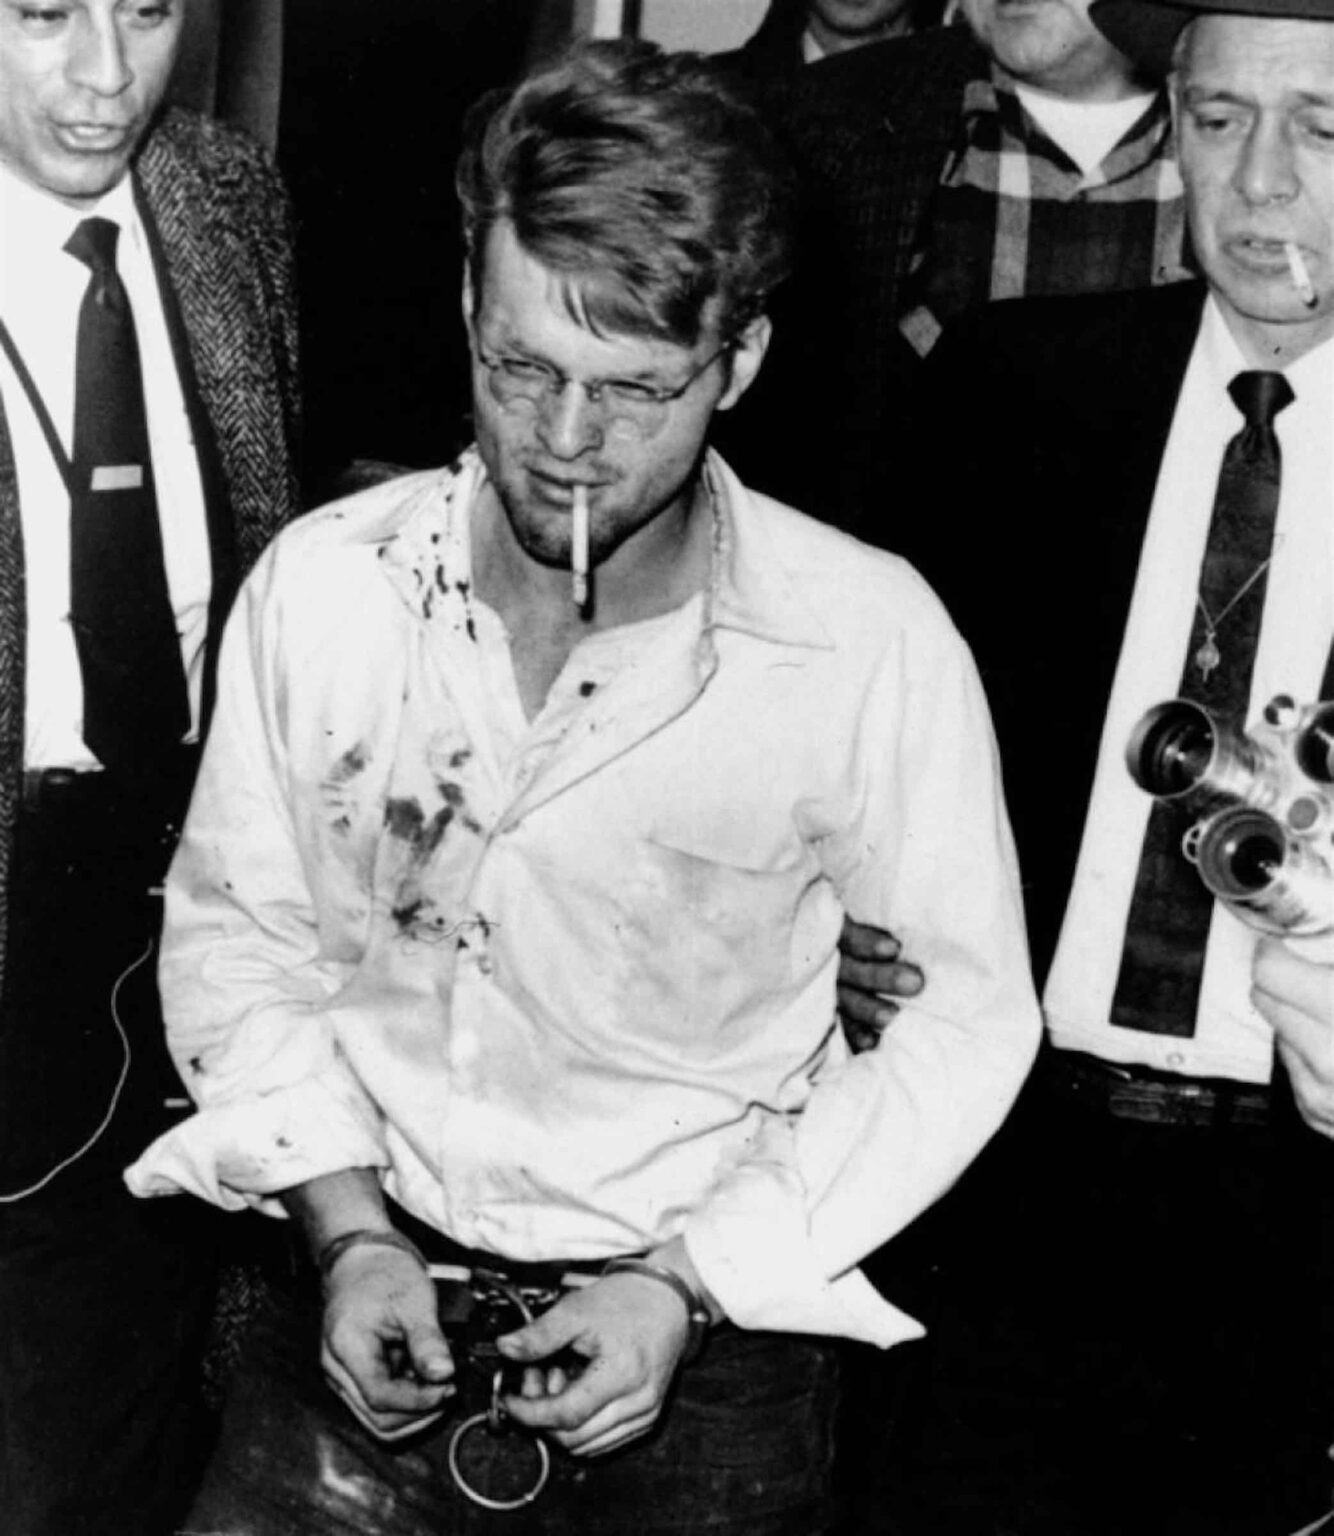 Charles Starkweather was almost an adult when he went on a killing spree at age nineteen. Here's what you need to know about teen murderer Starkweather.